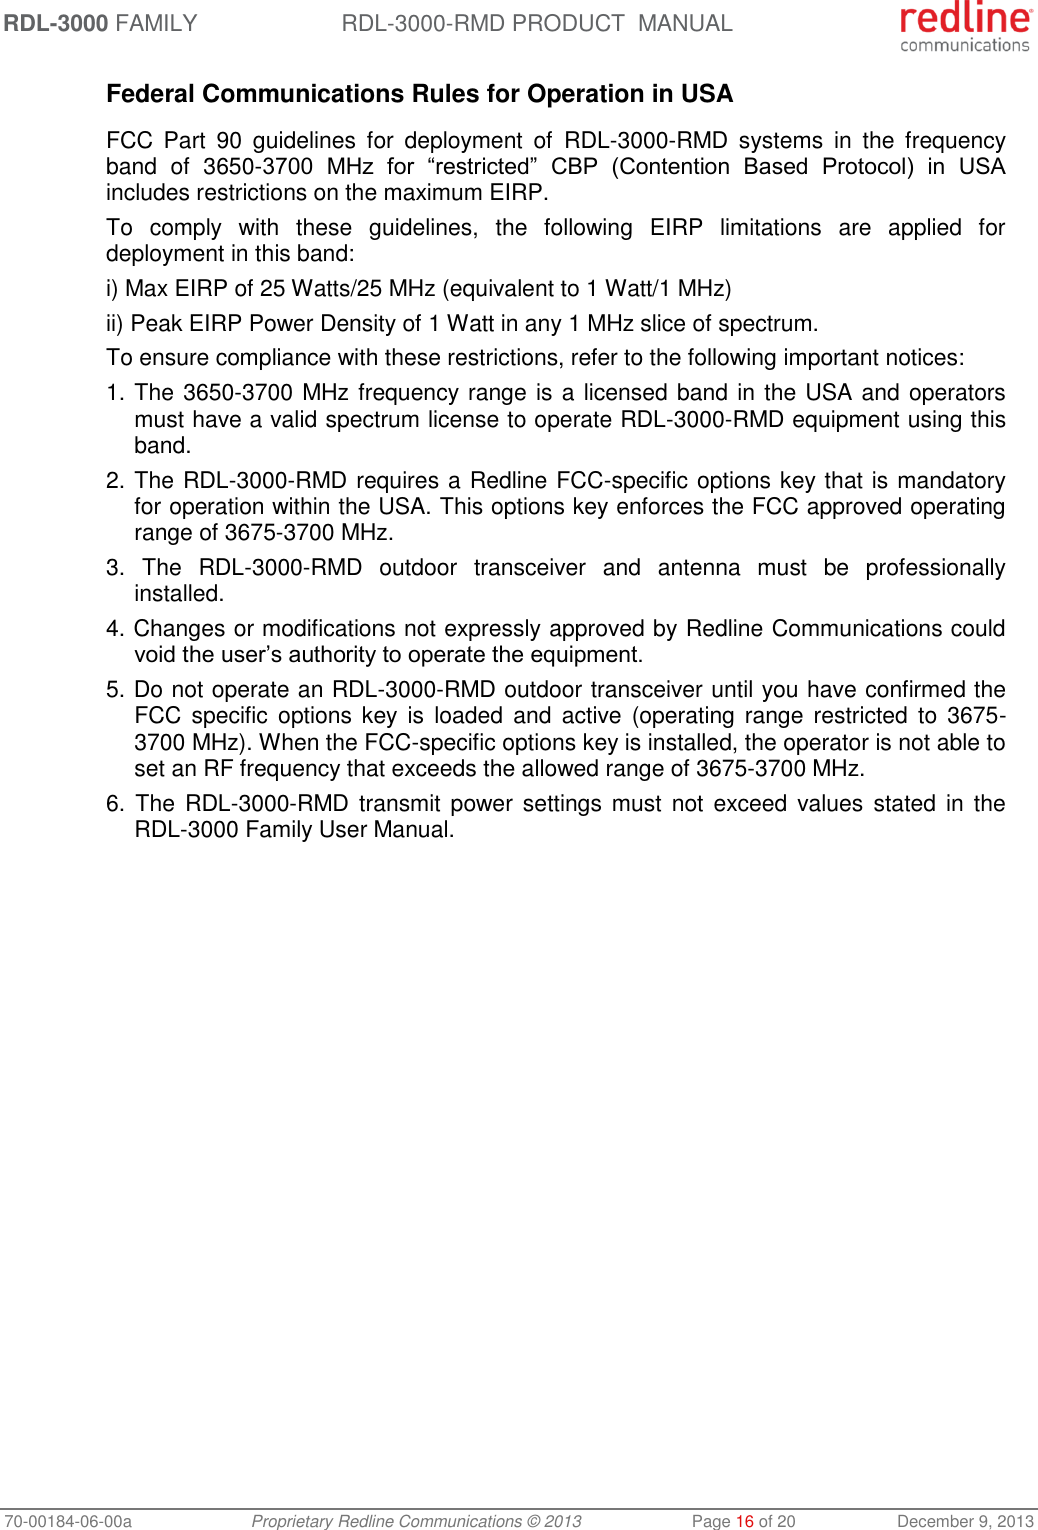 RDL-3000 FAMILY RDL-3000-RMD PRODUCT  MANUAL 70-00184-06-00a  Proprietary Redline Communications © 2013  Page 16 of 20  December 9, 2013 Federal Communications Rules for Operation in USA  FCC  Part  90  guidelines  for  deployment  of  RDL-3000-RMD  systems  in  the  frequency band  of  3650-3700  MHz  for  “restricted”  CBP  (Contention  Based  Protocol)  in  USA includes restrictions on the maximum EIRP. To  comply  with  these  guidelines,  the  following  EIRP  limitations  are  applied  for deployment in this band: i) Max EIRP of 25 Watts/25 MHz (equivalent to 1 Watt/1 MHz) ii) Peak EIRP Power Density of 1 Watt in any 1 MHz slice of spectrum.  To ensure compliance with these restrictions, refer to the following important notices: 1. The 3650-3700 MHz frequency range is a licensed band in the USA and operators must have a valid spectrum license to operate RDL-3000-RMD equipment using this band. 2. The RDL-3000-RMD requires a Redline FCC-specific options key that is mandatory for operation within the USA. This options key enforces the FCC approved operating range of 3675-3700 MHz. 3.  The  RDL-3000-RMD  outdoor  transceiver  and  antenna  must  be  professionally installed. 4. Changes or modifications not expressly approved by Redline Communications could void the user’s authority to operate the equipment. 5. Do not operate an RDL-3000-RMD outdoor transceiver until you have confirmed the FCC  specific  options key  is  loaded  and  active  (operating  range  restricted  to  3675-3700 MHz). When the FCC-specific options key is installed, the operator is not able to set an RF frequency that exceeds the allowed range of 3675-3700 MHz. 6.  The  RDL-3000-RMD transmit  power settings must  not  exceed values  stated  in  the RDL-3000 Family User Manual.  